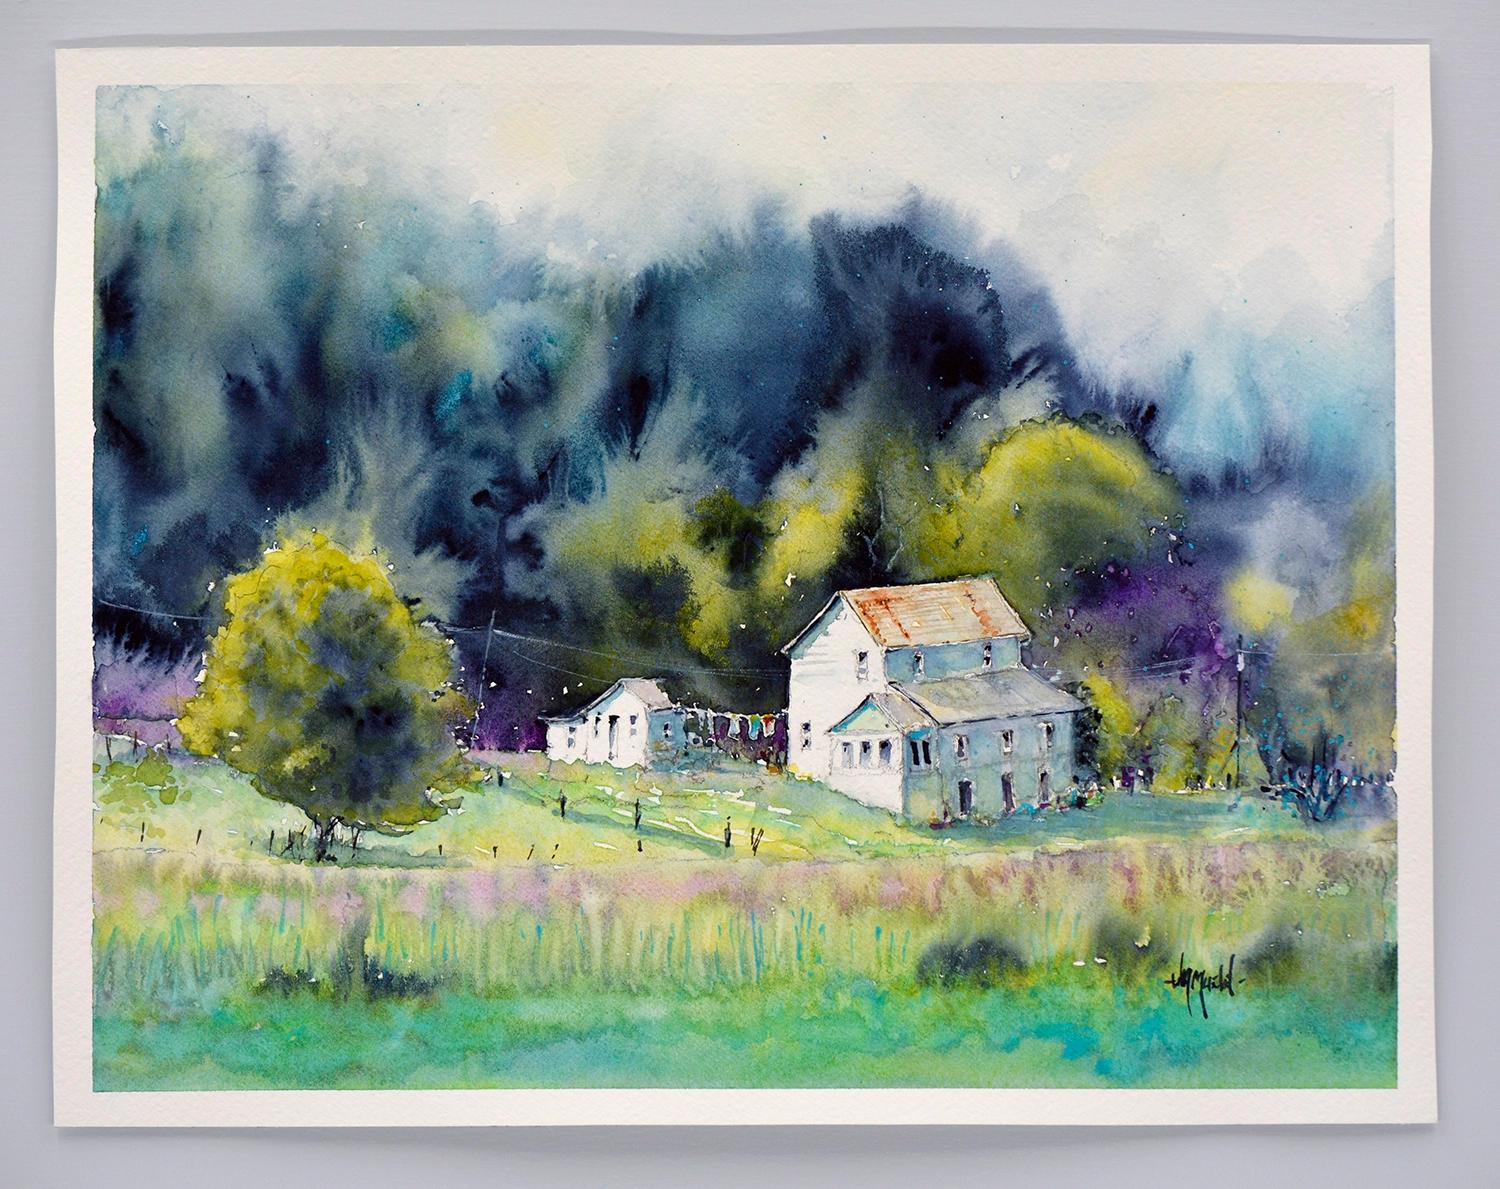 <p>Artist Comments<br>Garments gently sway on a clothesline attached to a farmhouse, portraying the simple beauty of a typical day in the countryside. This artwork is part of artist Judy Mudd's Land, Farms, and Homes collection. Judy creates an